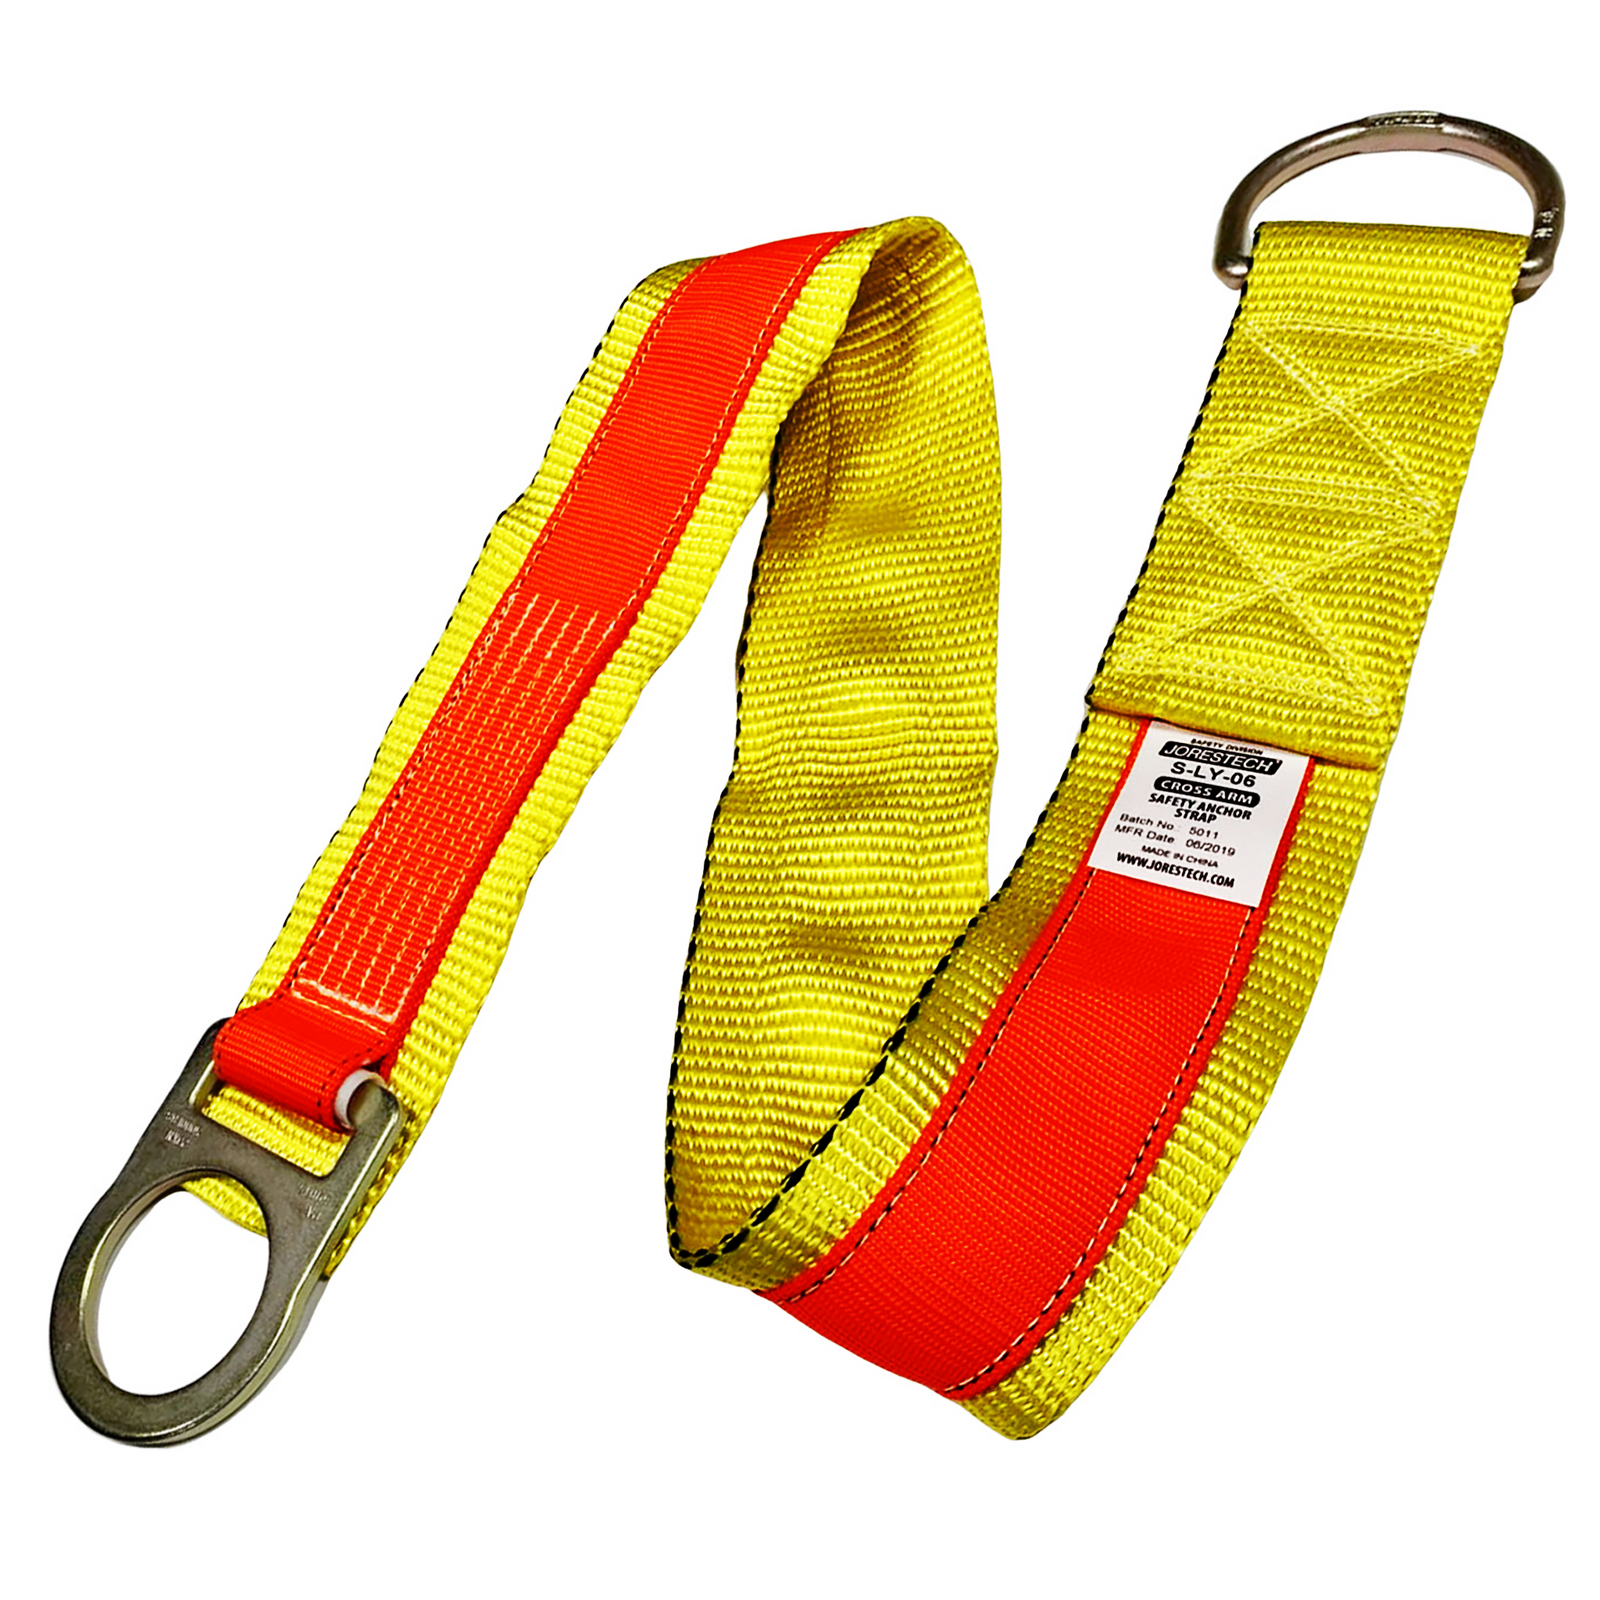 SL Anchor Strap with Steel D-Rings